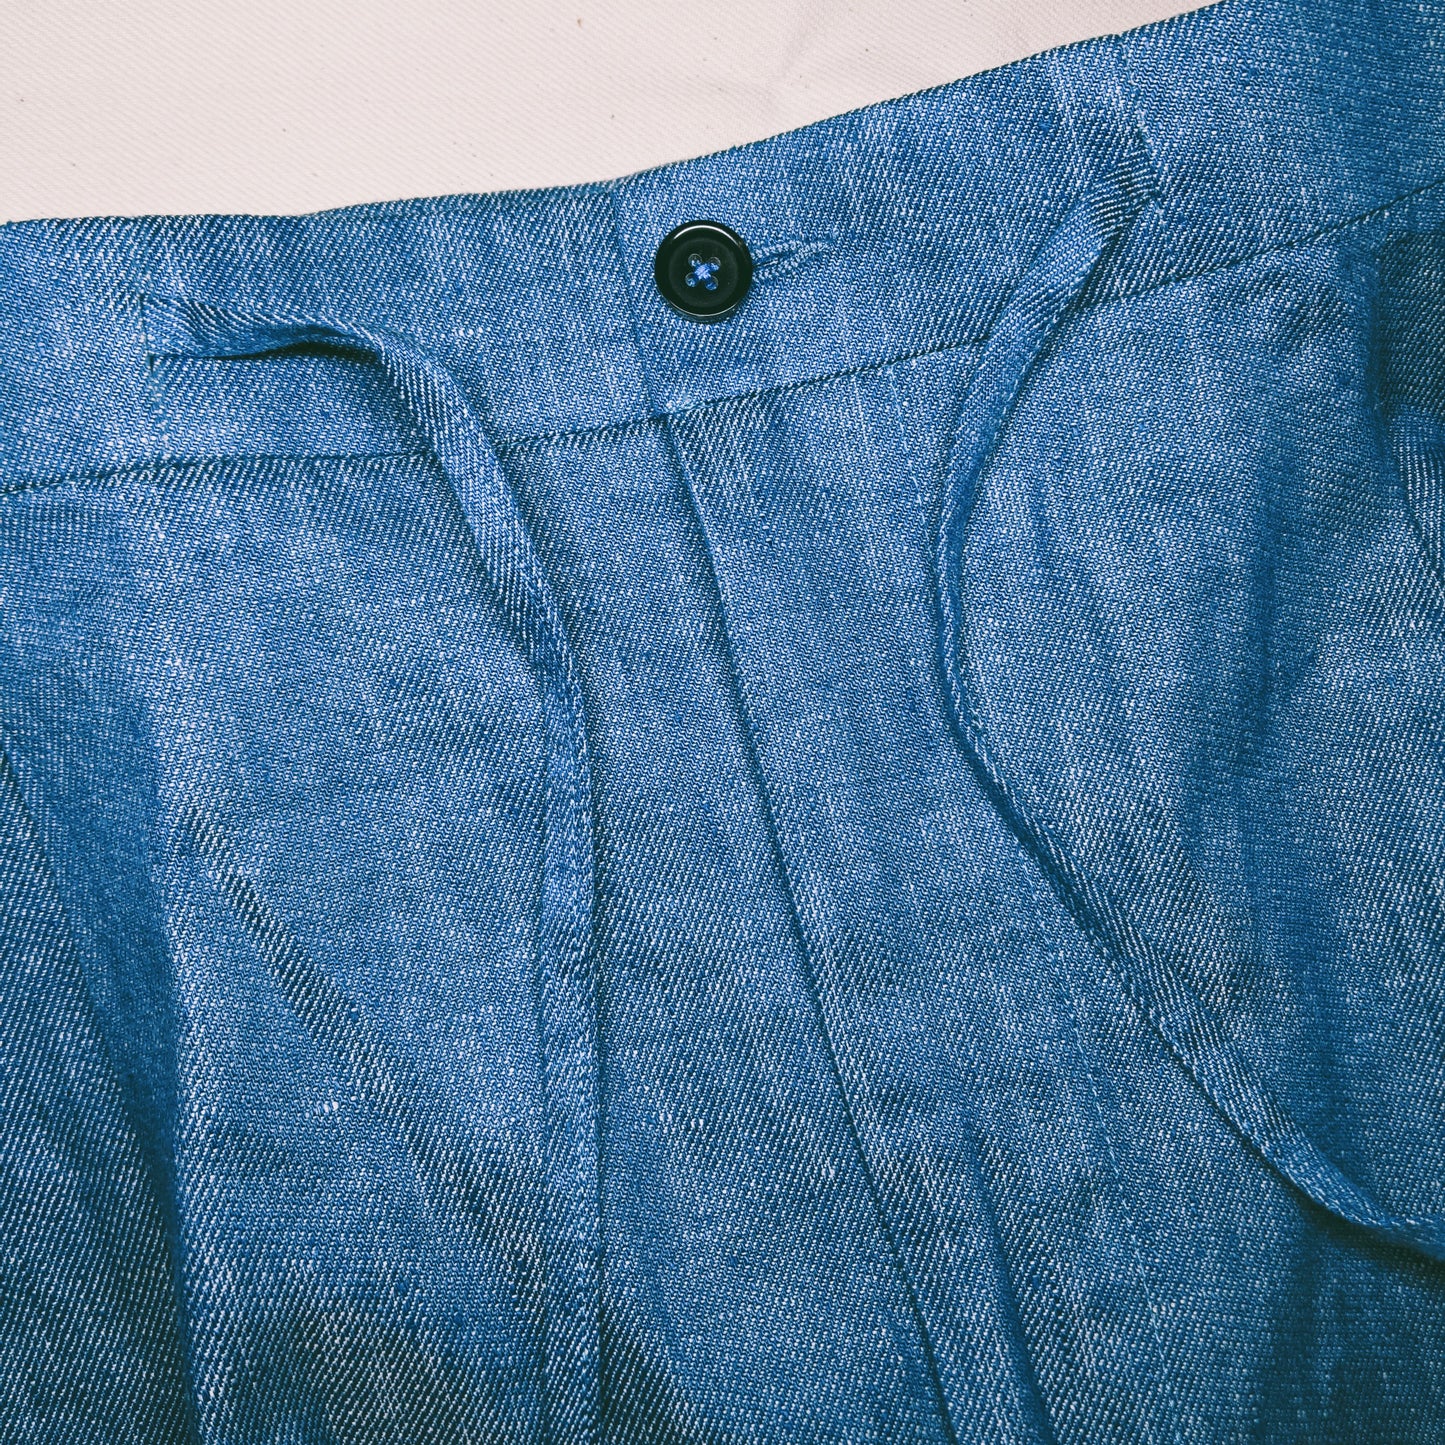 [Sample] Japanese “Washed Denim” Linen Trousers  - ST044